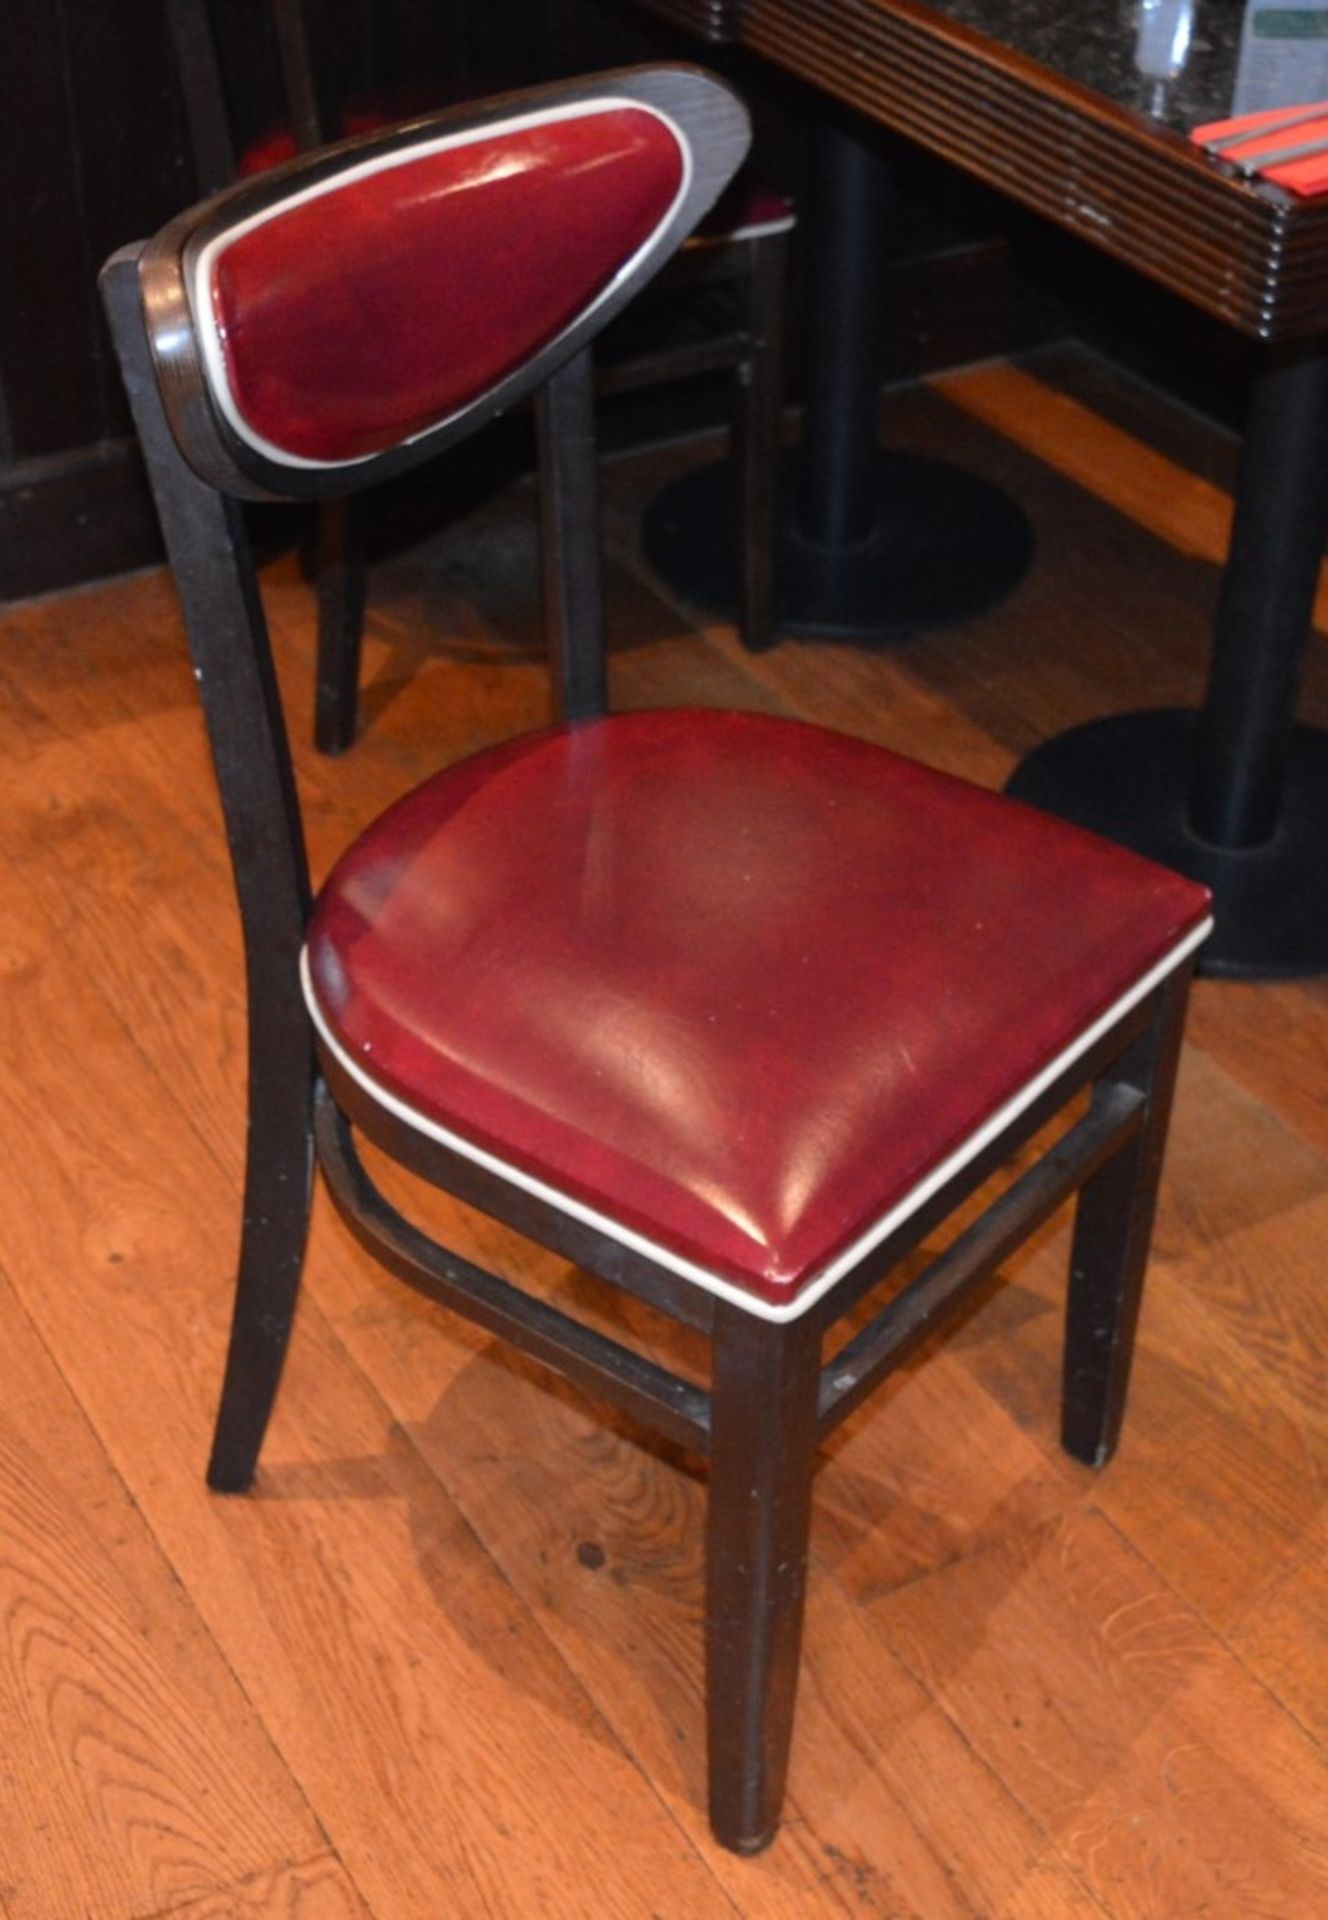 8 x American Diner Restaurant Chairs - Each Features Red Faux Leather Upholstery And White